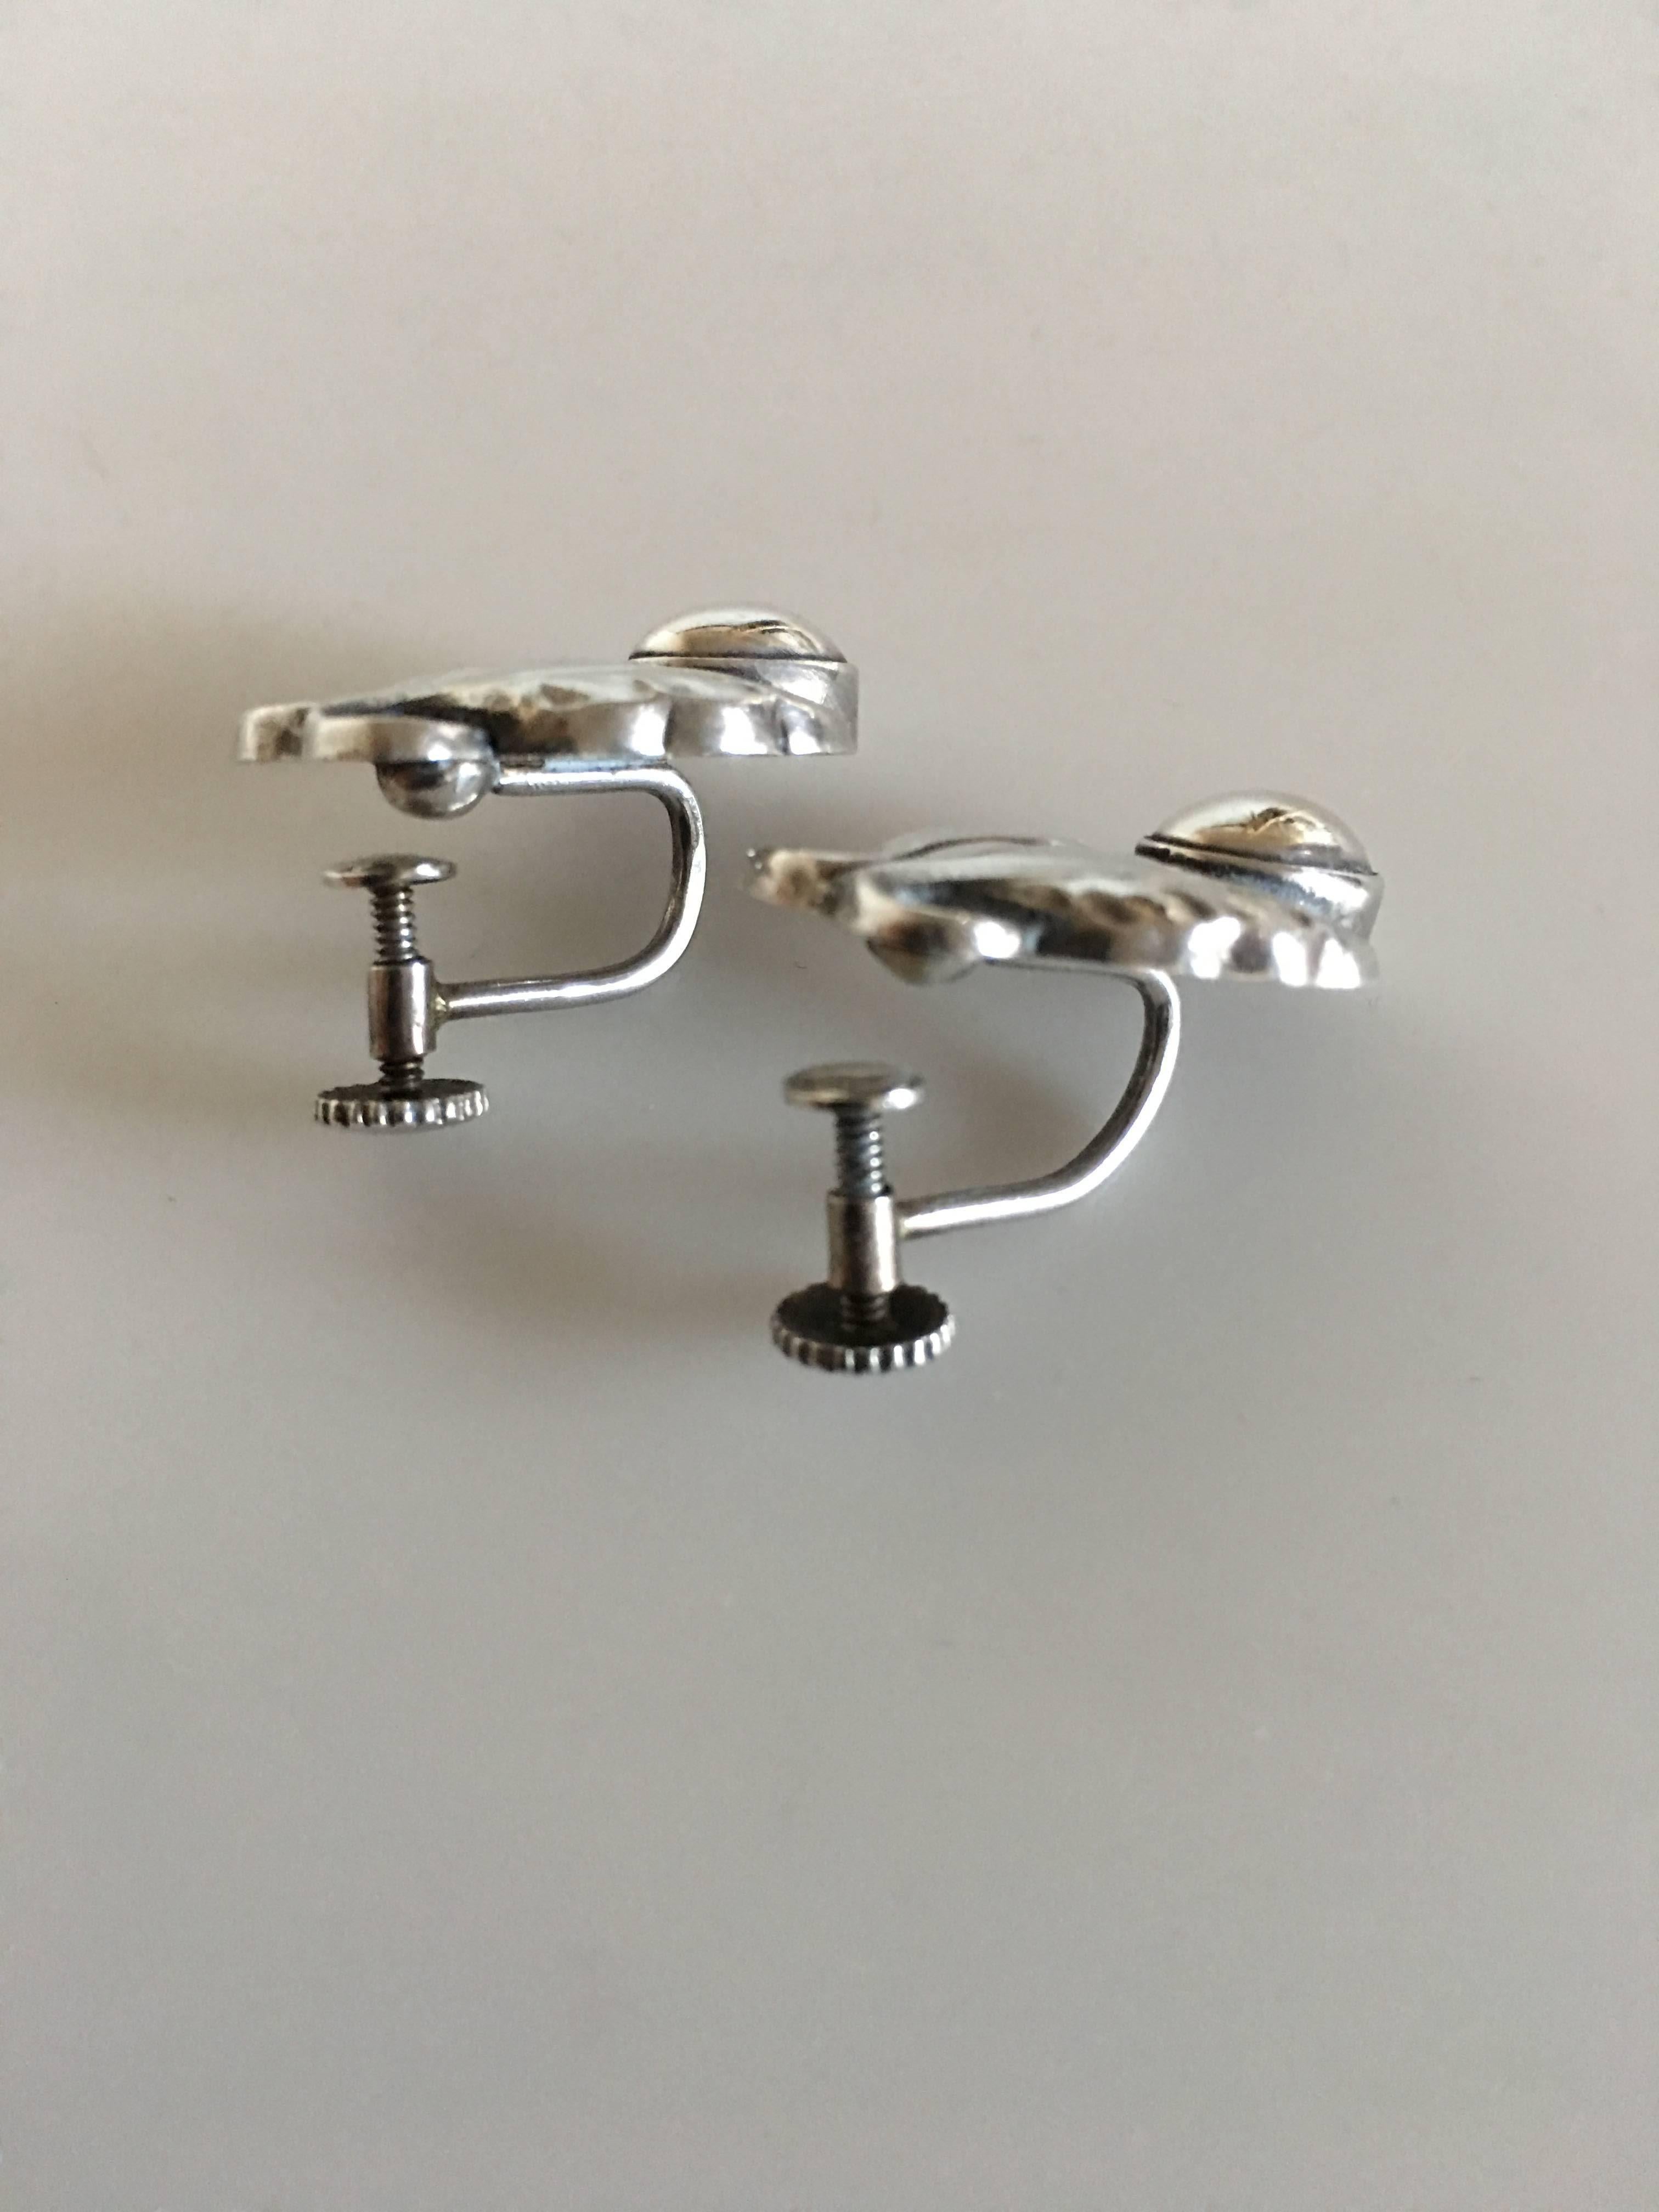 Georg Jensen sterling silver ear screws #108, from after 1945. Combined weight 7 grams. Measures. 2.4 cm (0 15/16